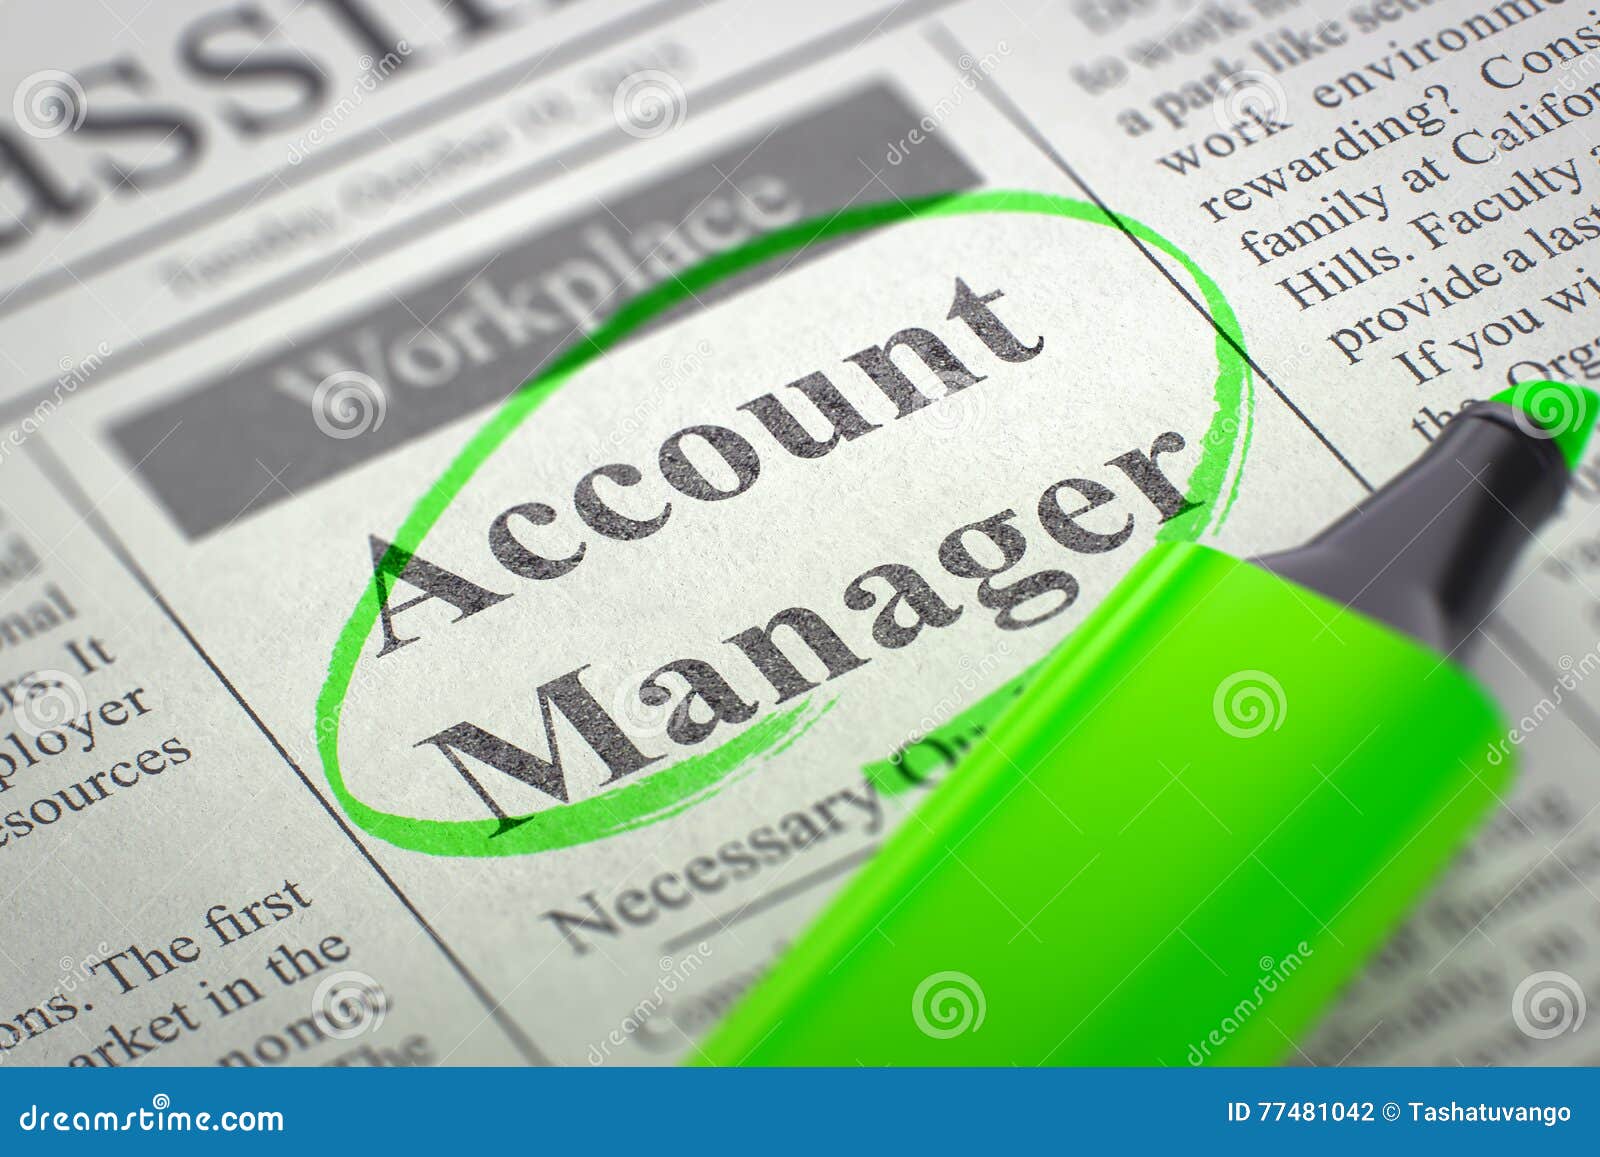 account manager hiring now. 3d.